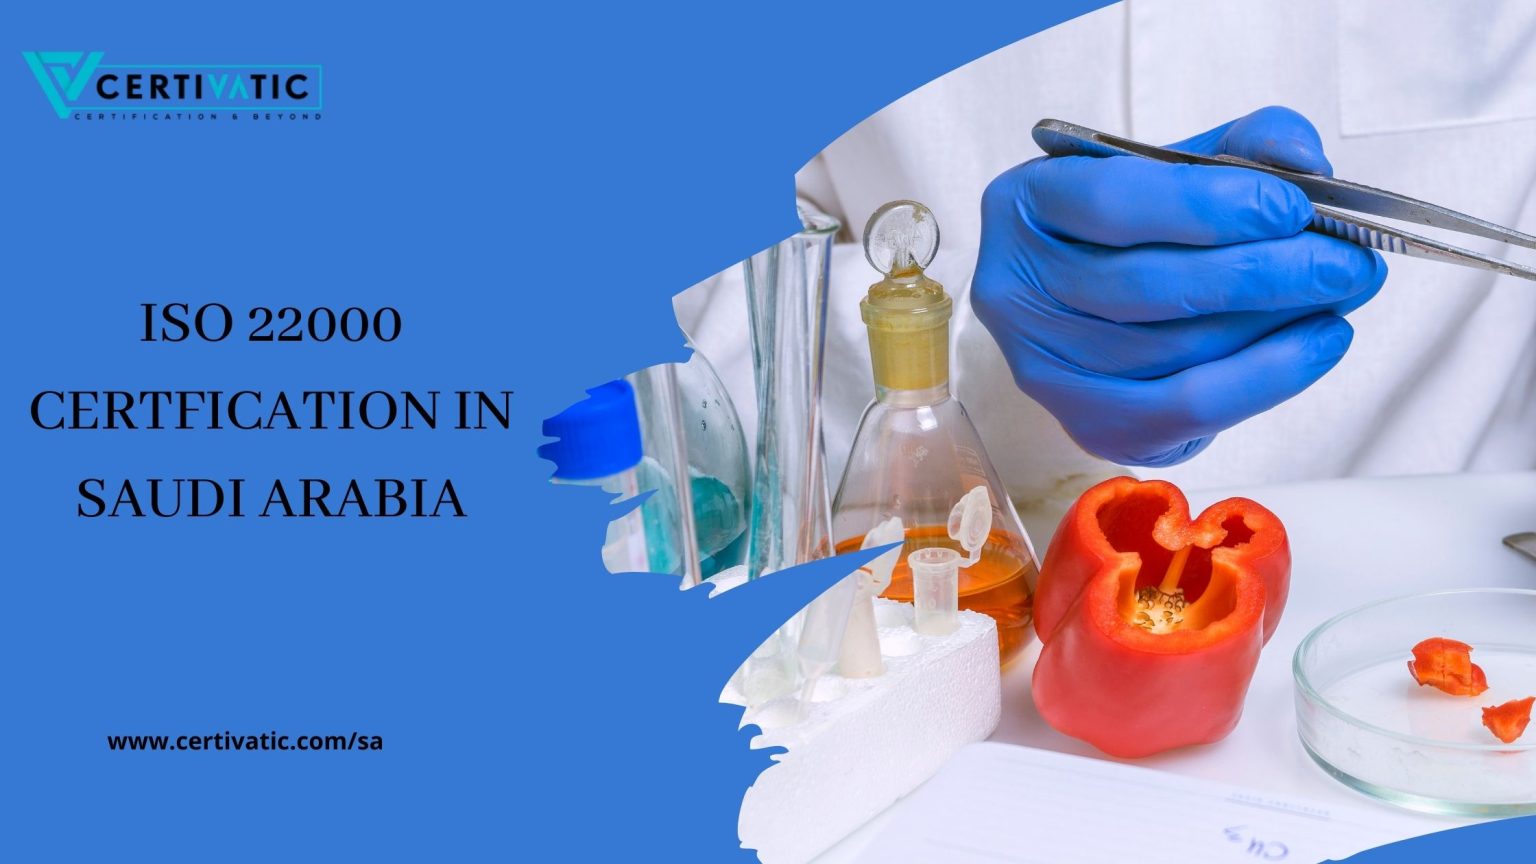 What is ISO 22000 Certification in Saudi Arabia and how important it is?